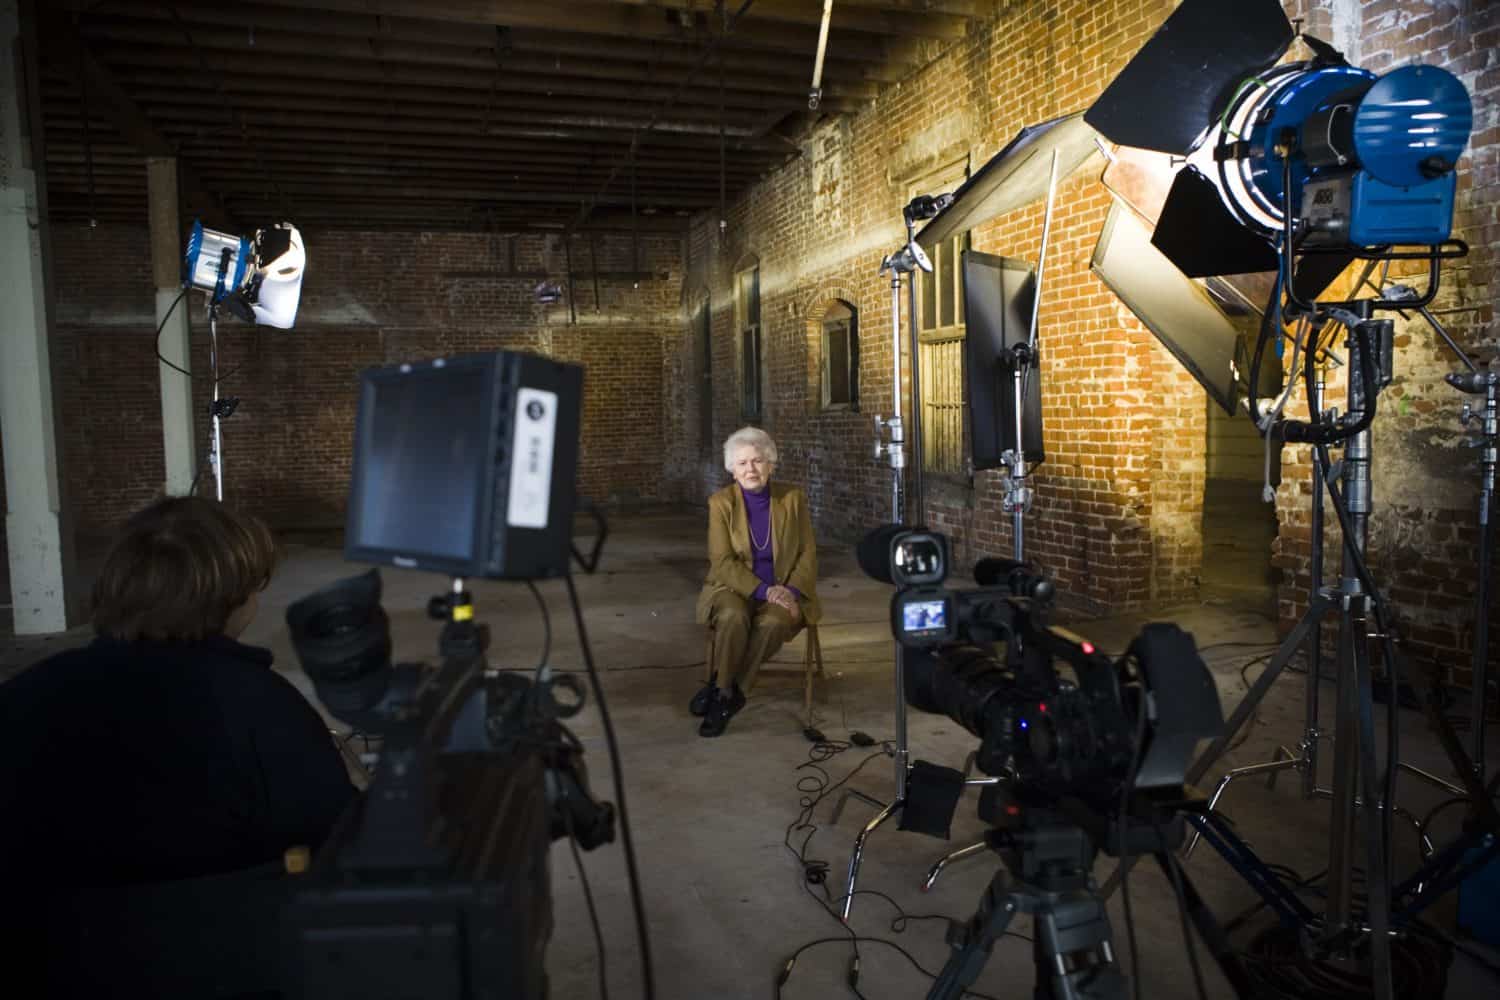 A camera crew films an old woman in a brick warehouse